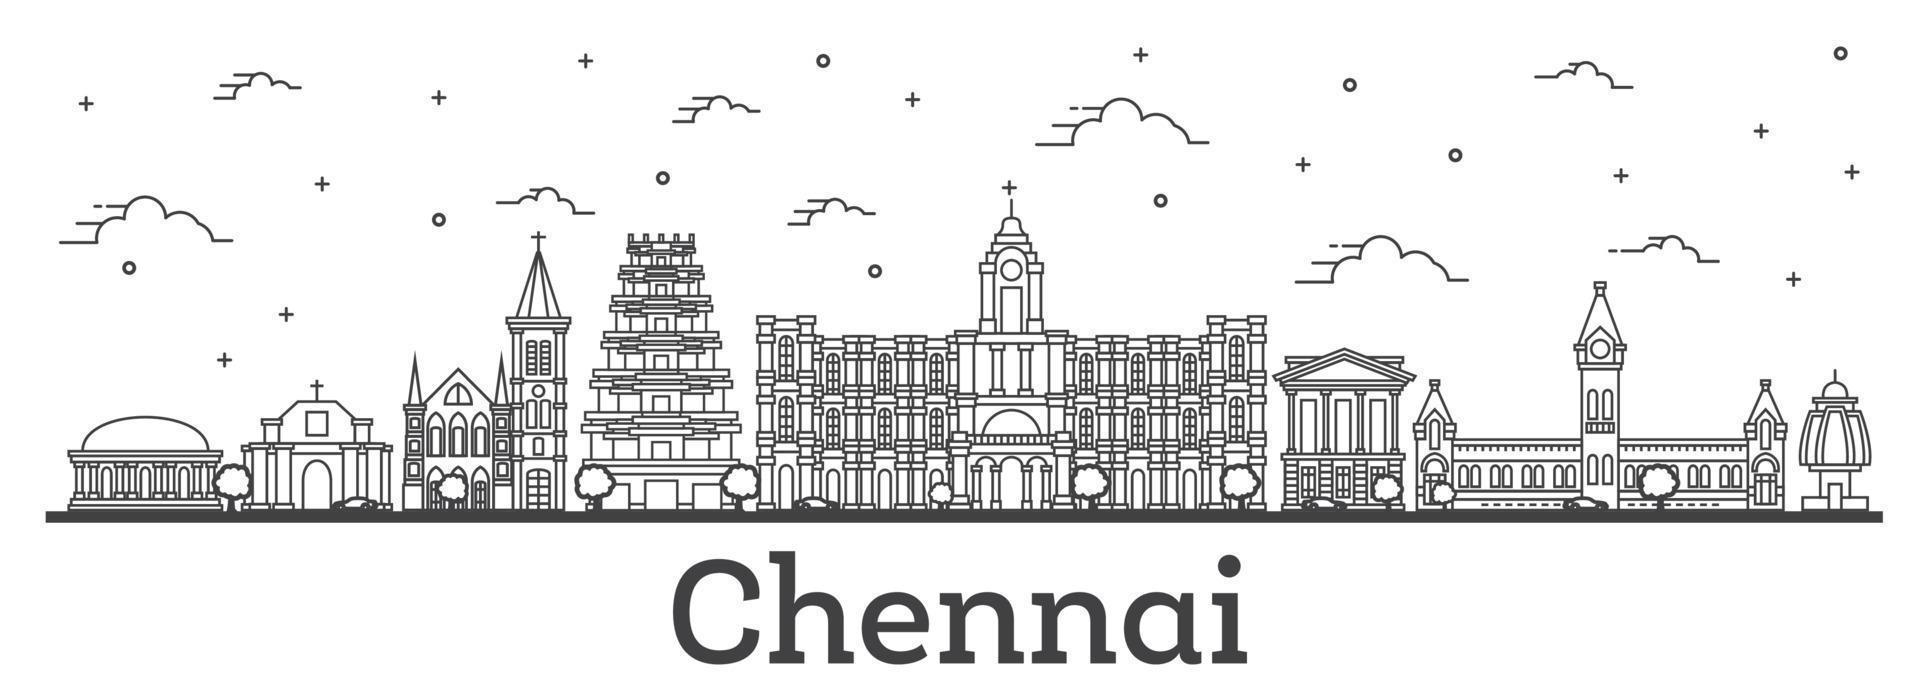 Outline Chennai India City Skyline with Historic Buildings Isolated on White. vector